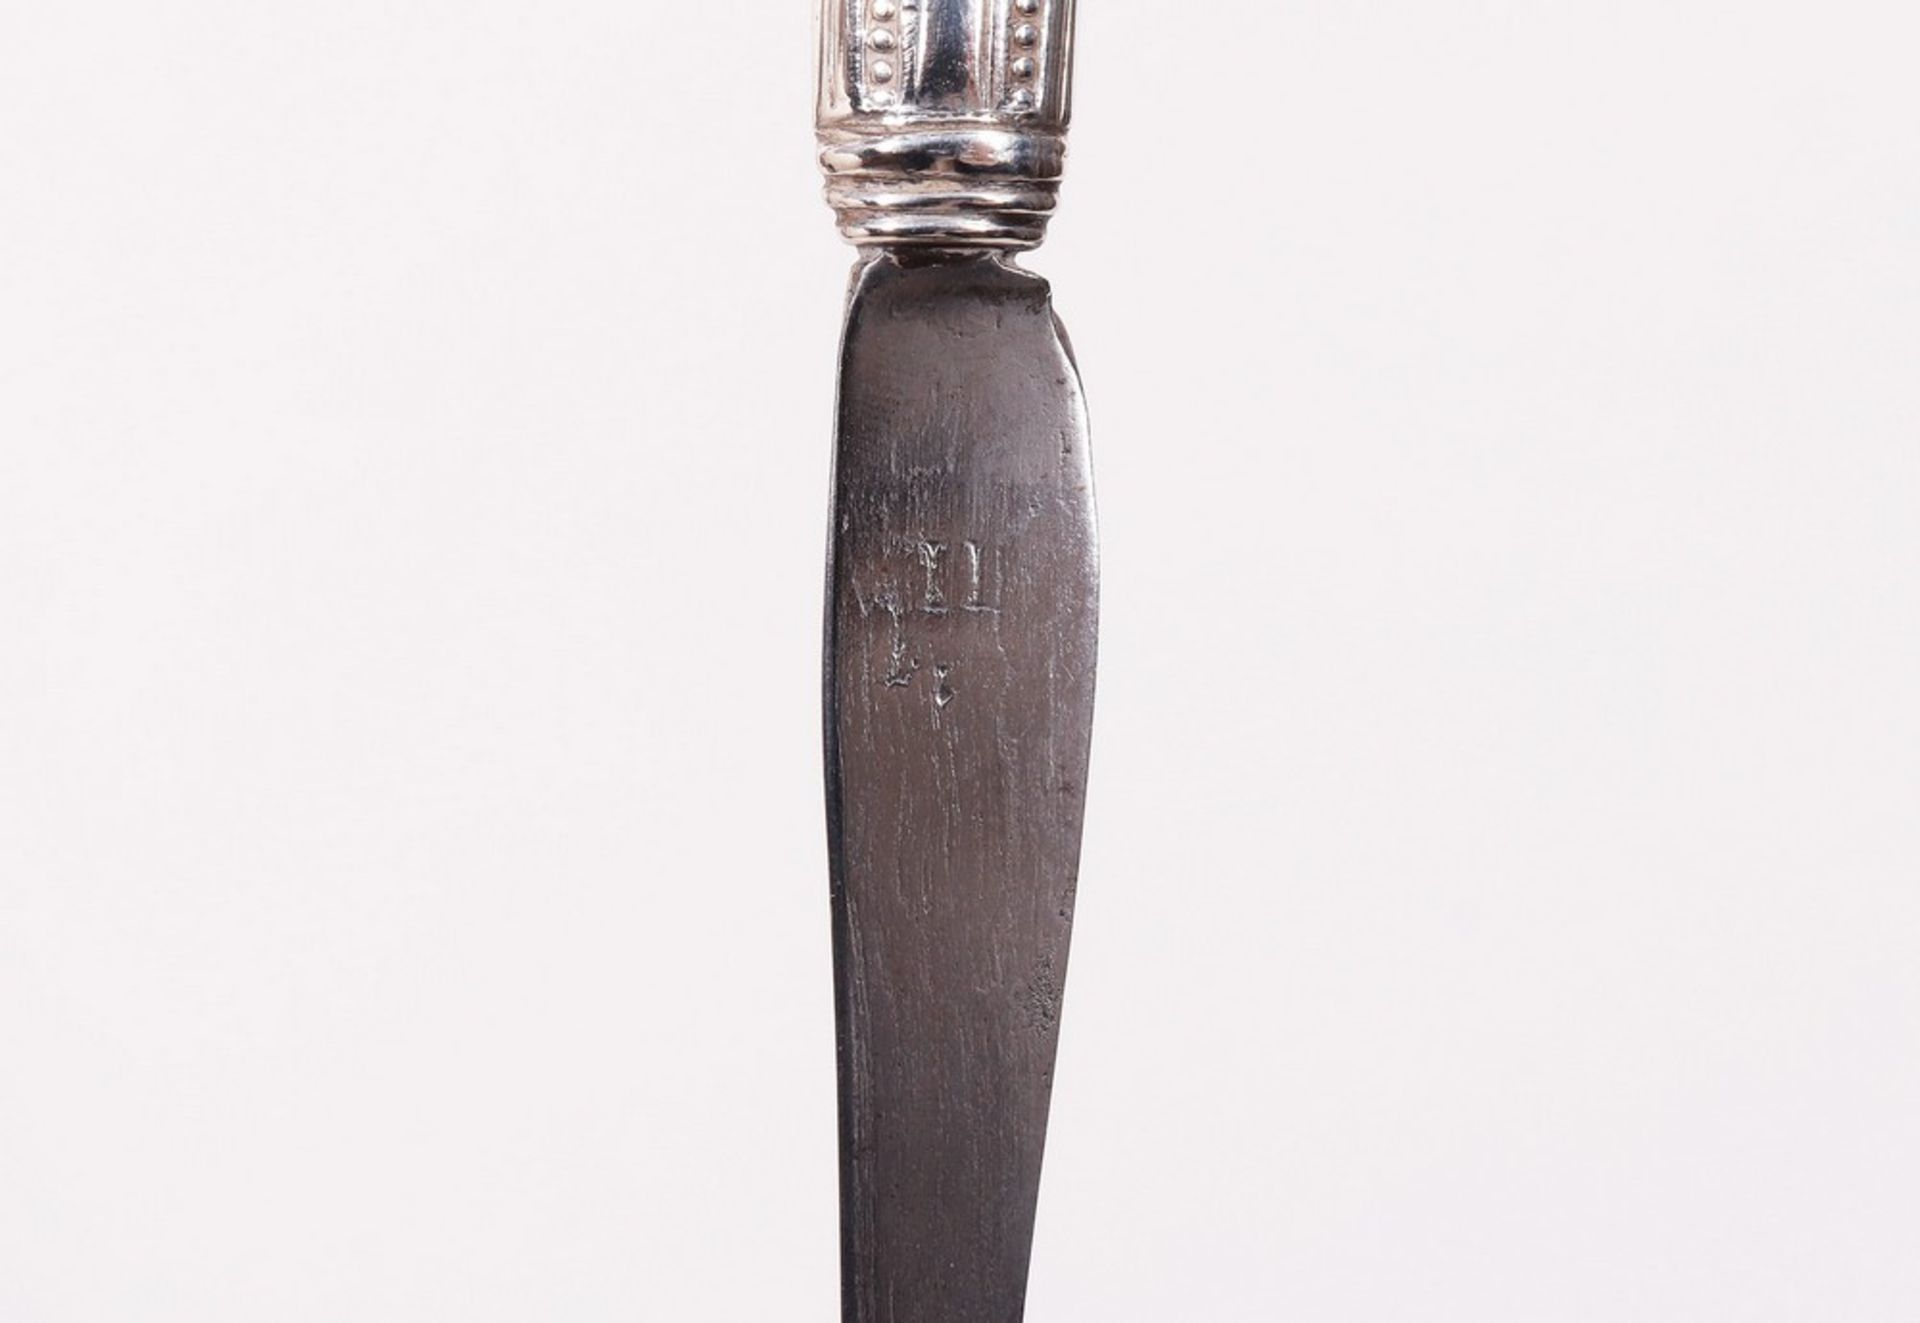 Travel cutlery in case, silver/metal, 18th/19th C. - Image 3 of 4